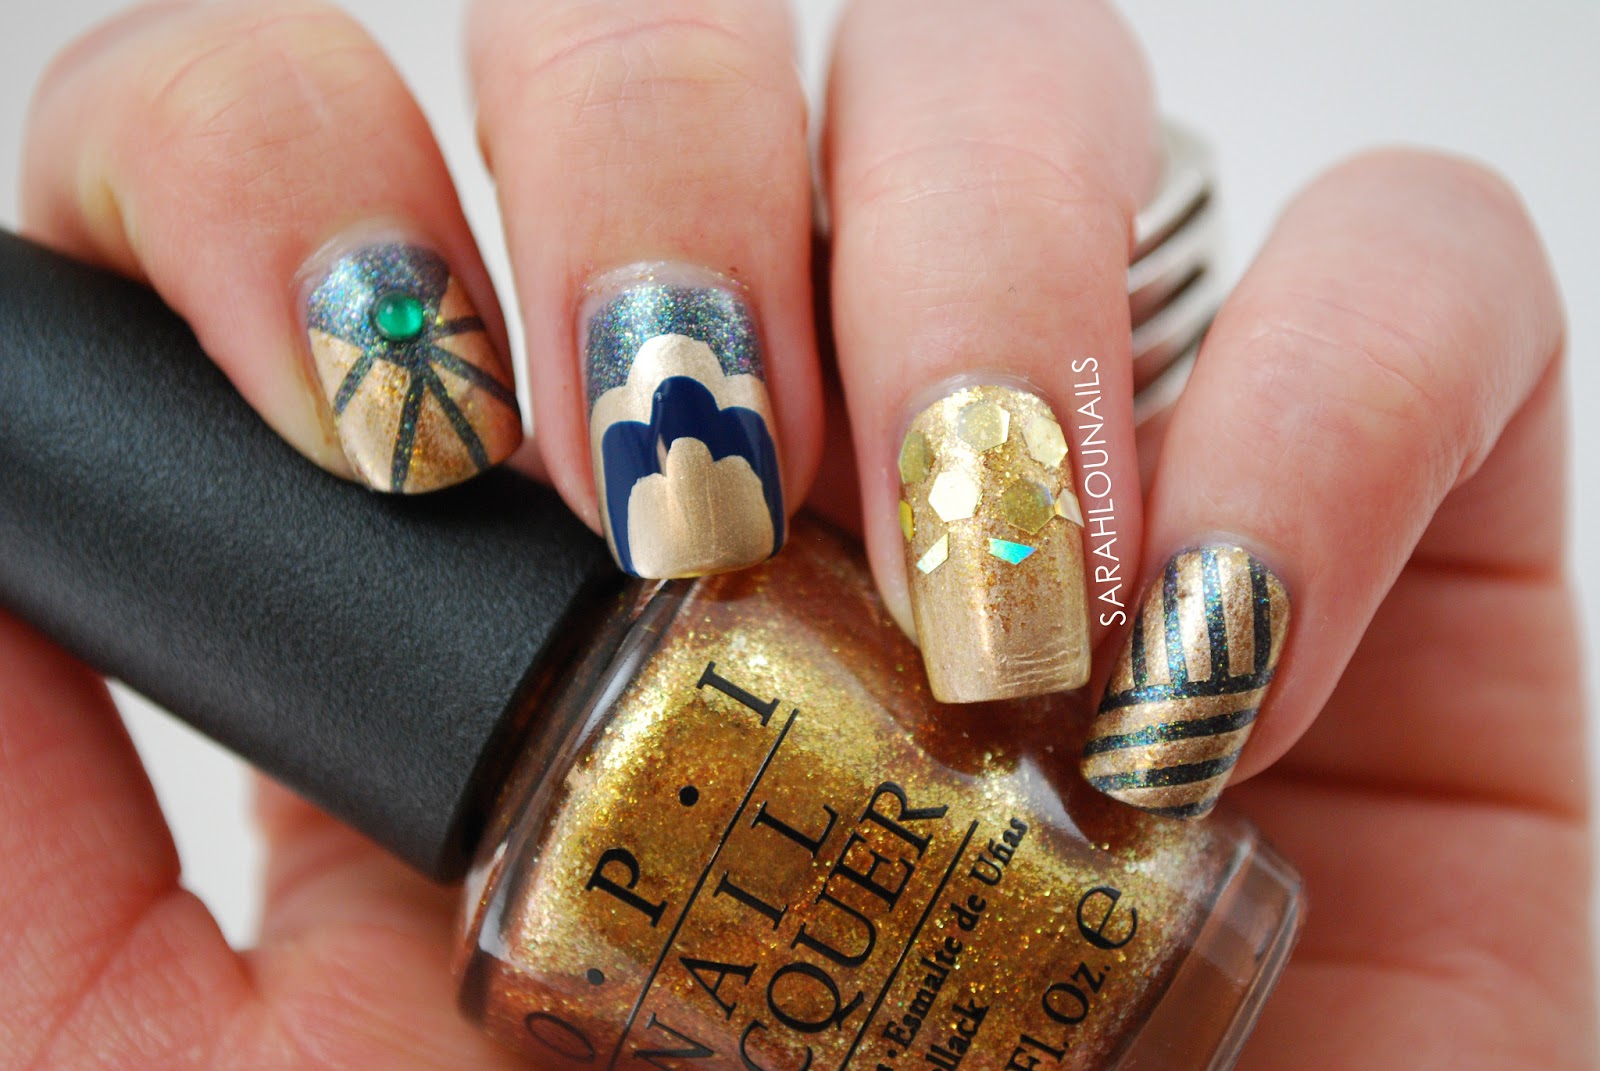 1. "Great Gatsby Inspired Nail Art Designs" - wide 8